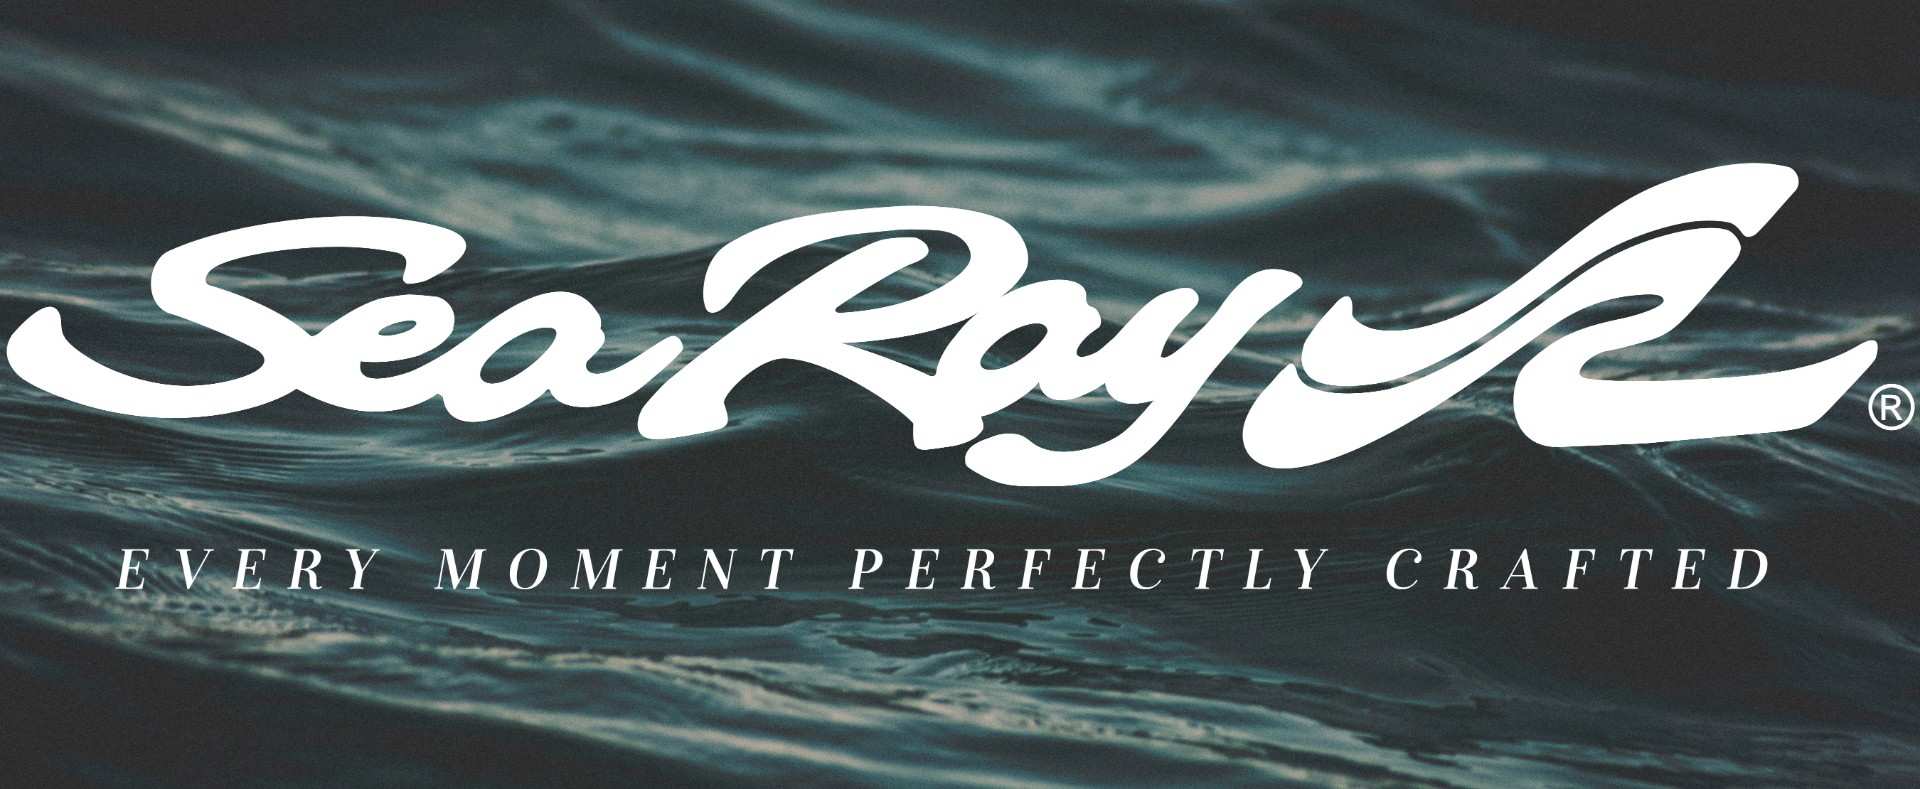 Sea-Ray-logo-Every-Moment-Perfectly-Crafted